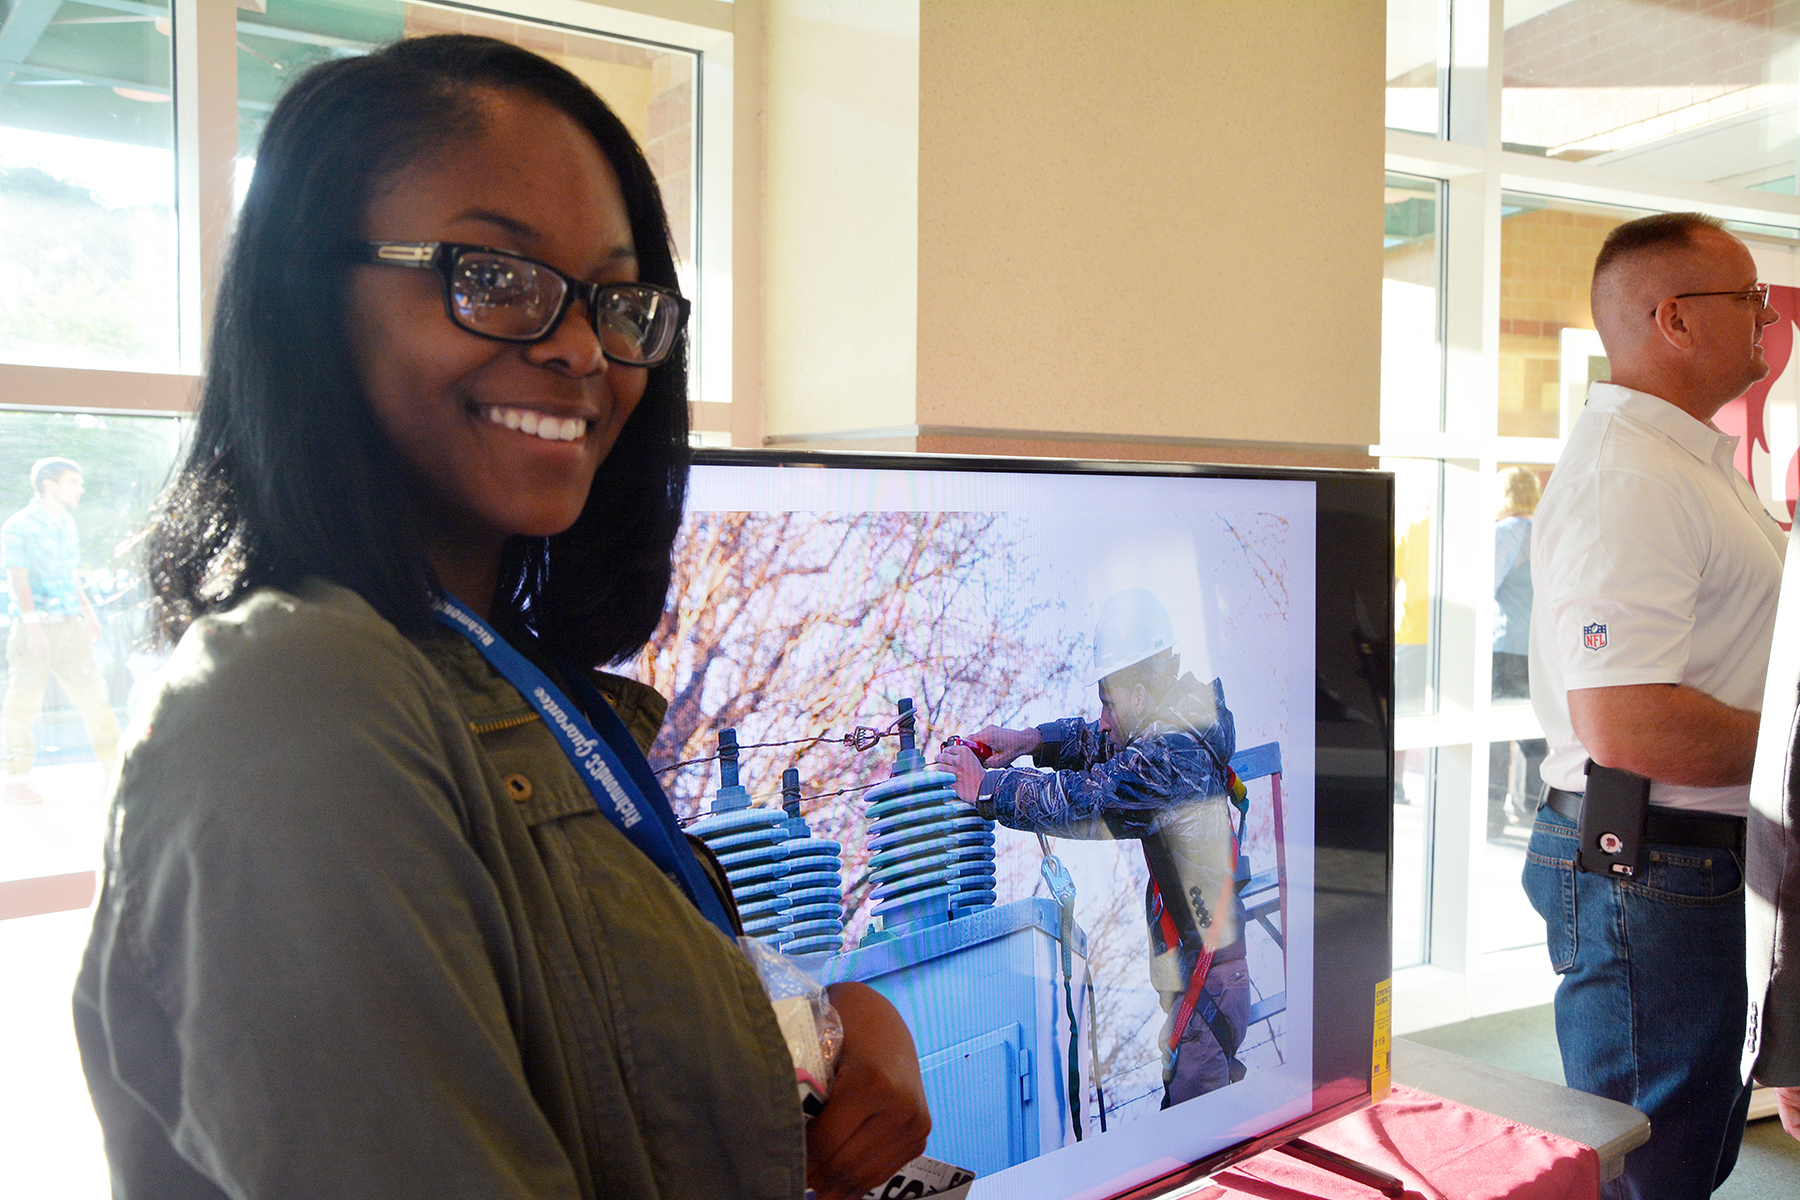 Picture is Arrion McNair, winner of the 55-inch television that was raffled off during the RichmondCC Guarantee Celebration and Open House. McNair is one of the graduating high school seniors who is on track to receive the RichmondCC Guarantee.